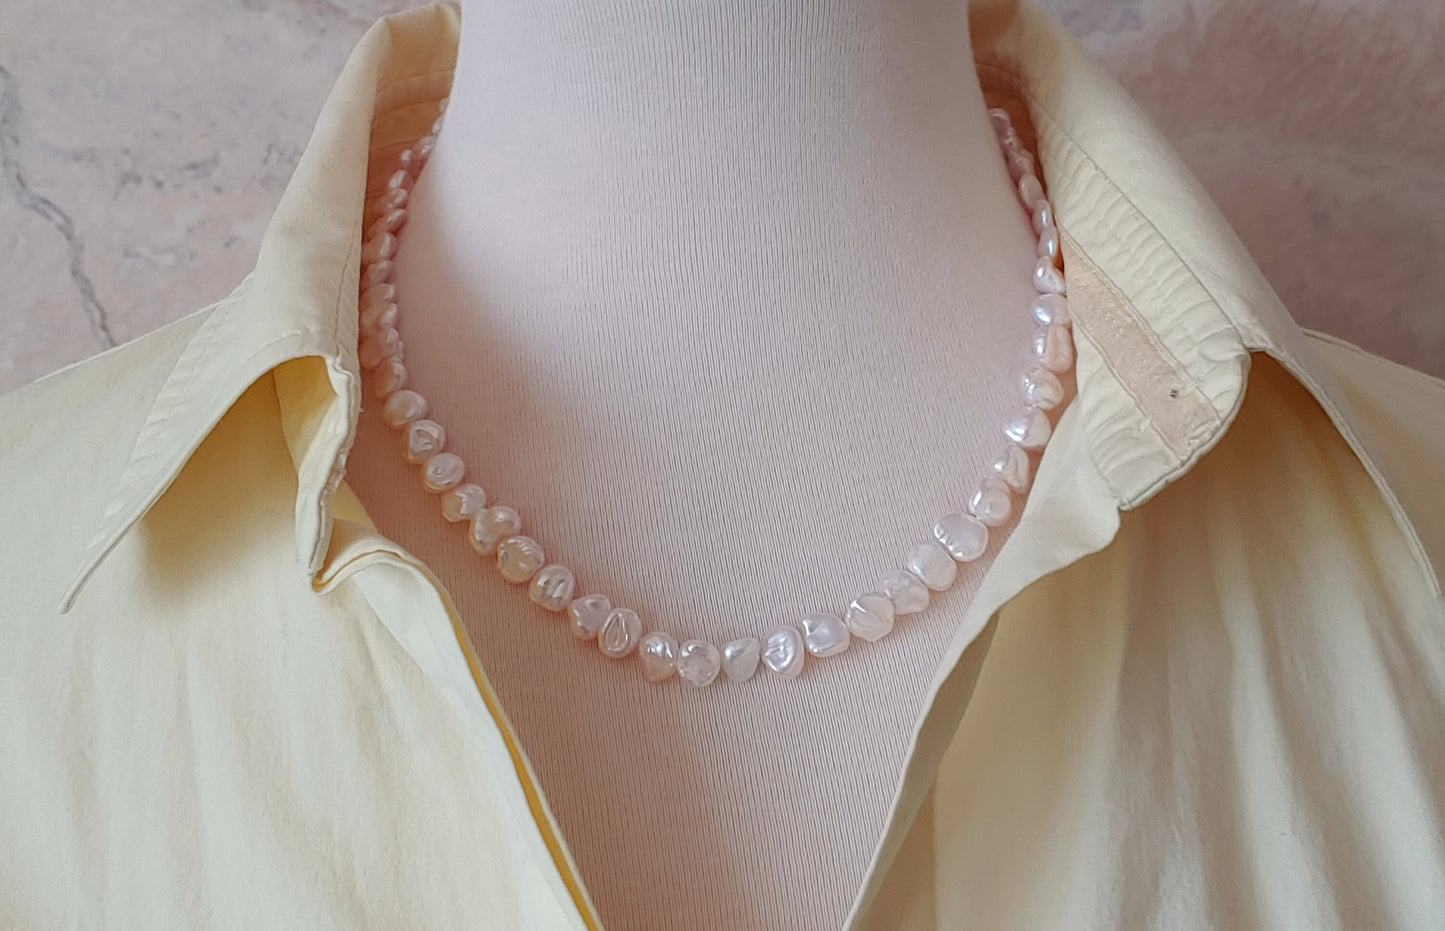 Biwa pearl necklace with 14k gold clasp